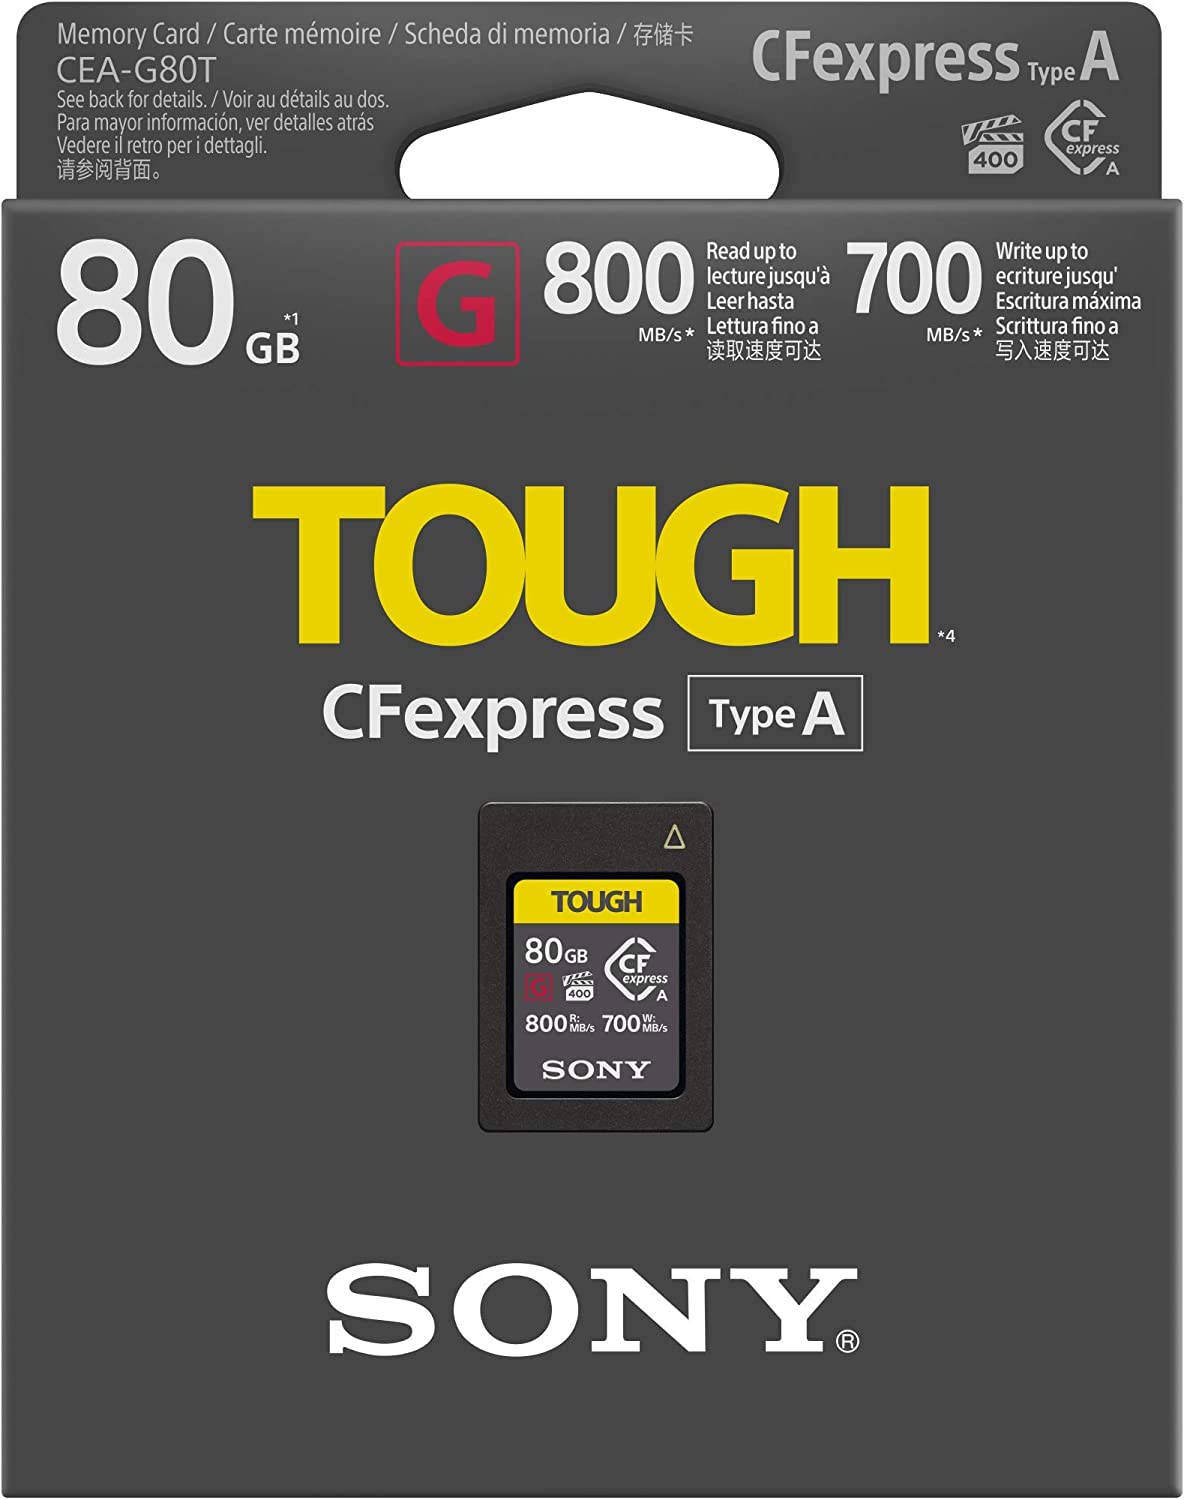 Sony 80GB CFexpress Type A (800MB/s) Memory Card - Product Photo 2 - Memory card packaging